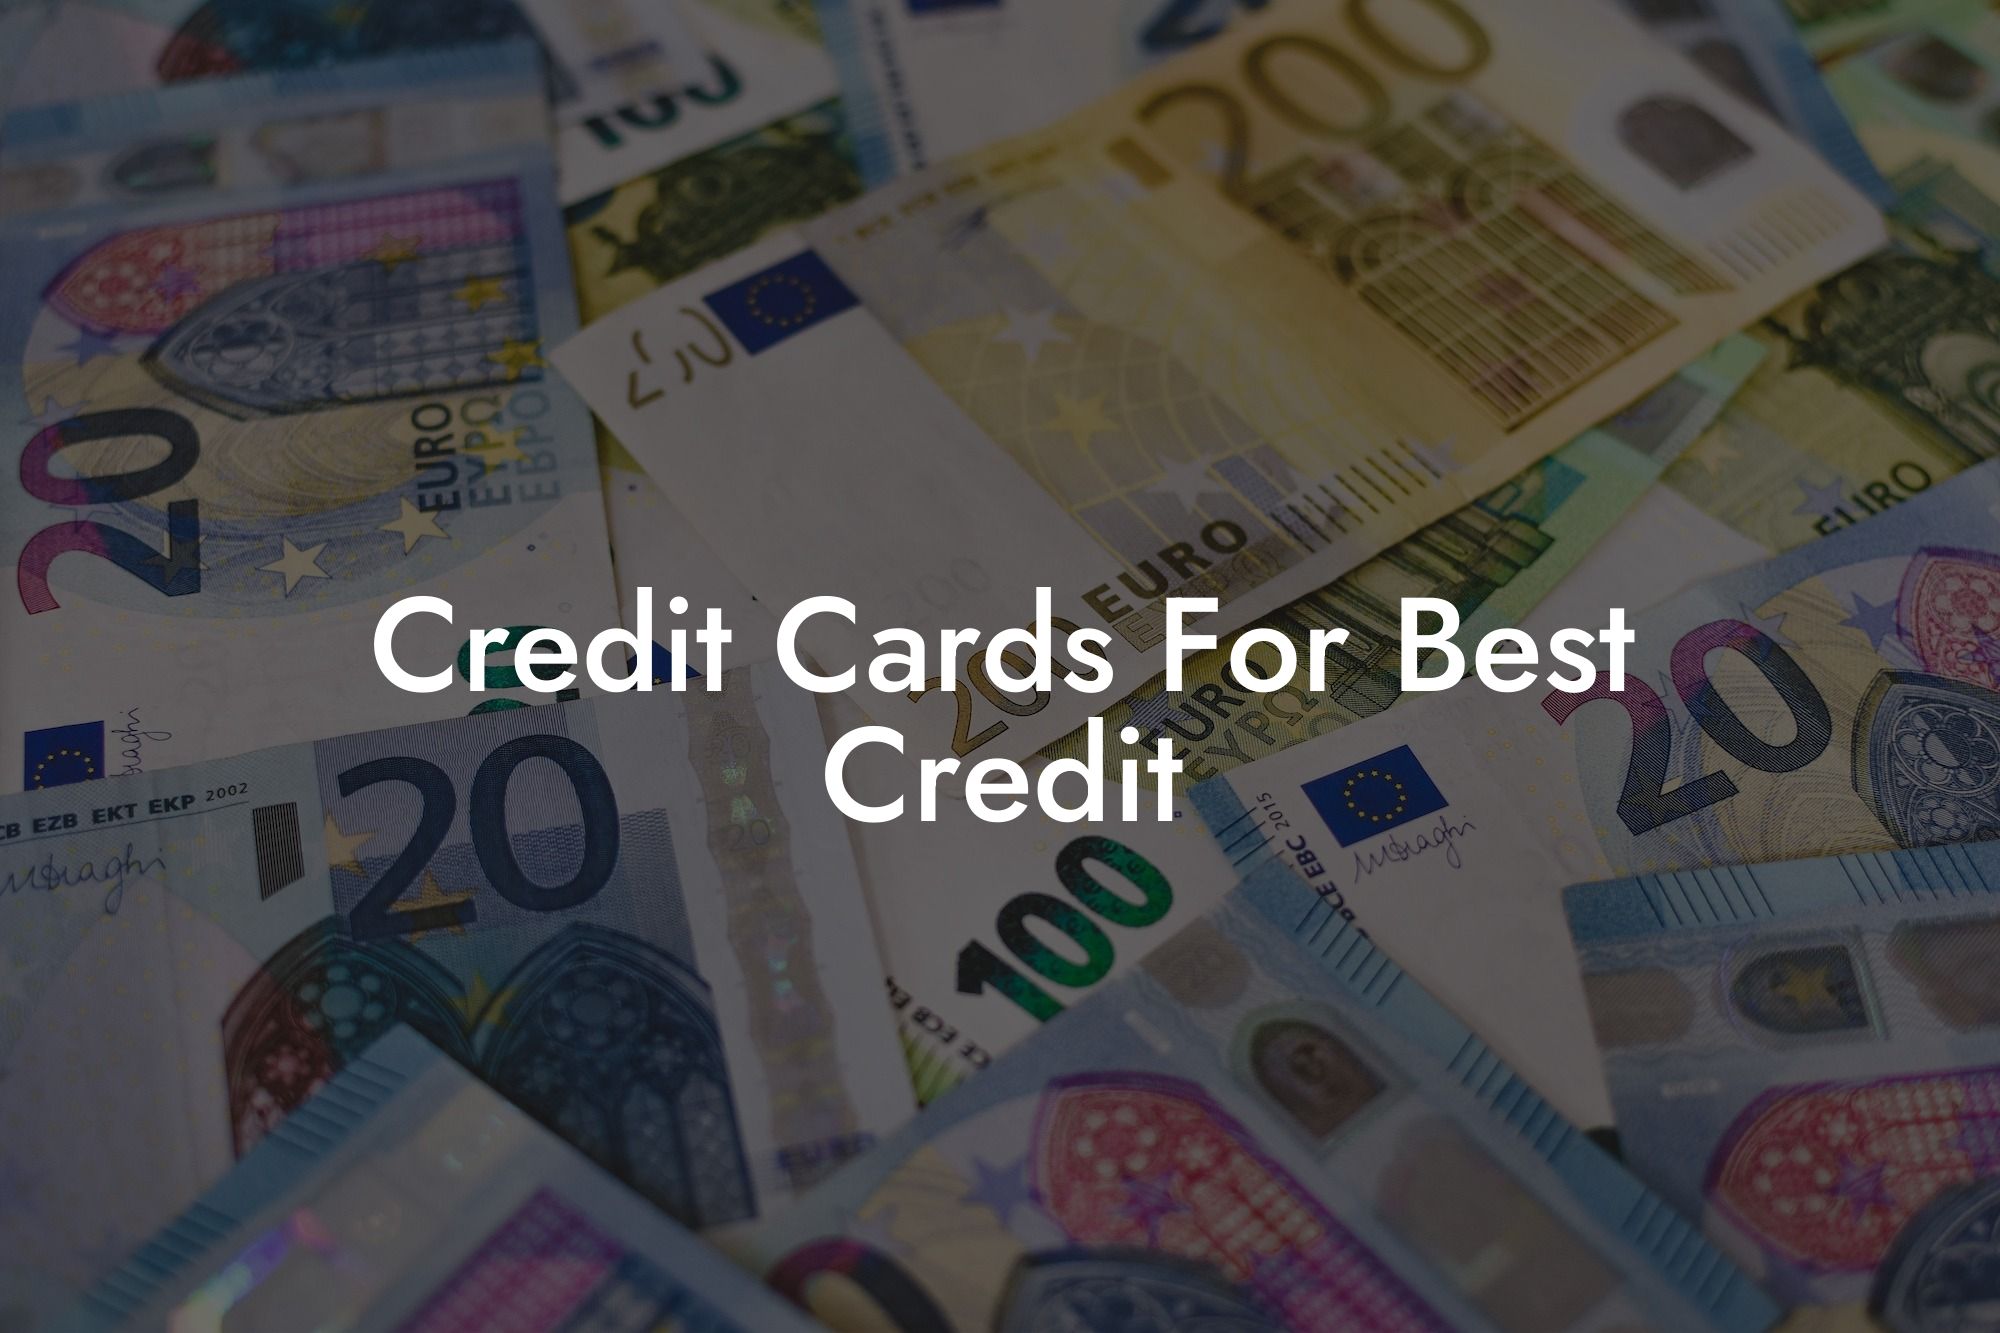 Credit Cards For Best Credit